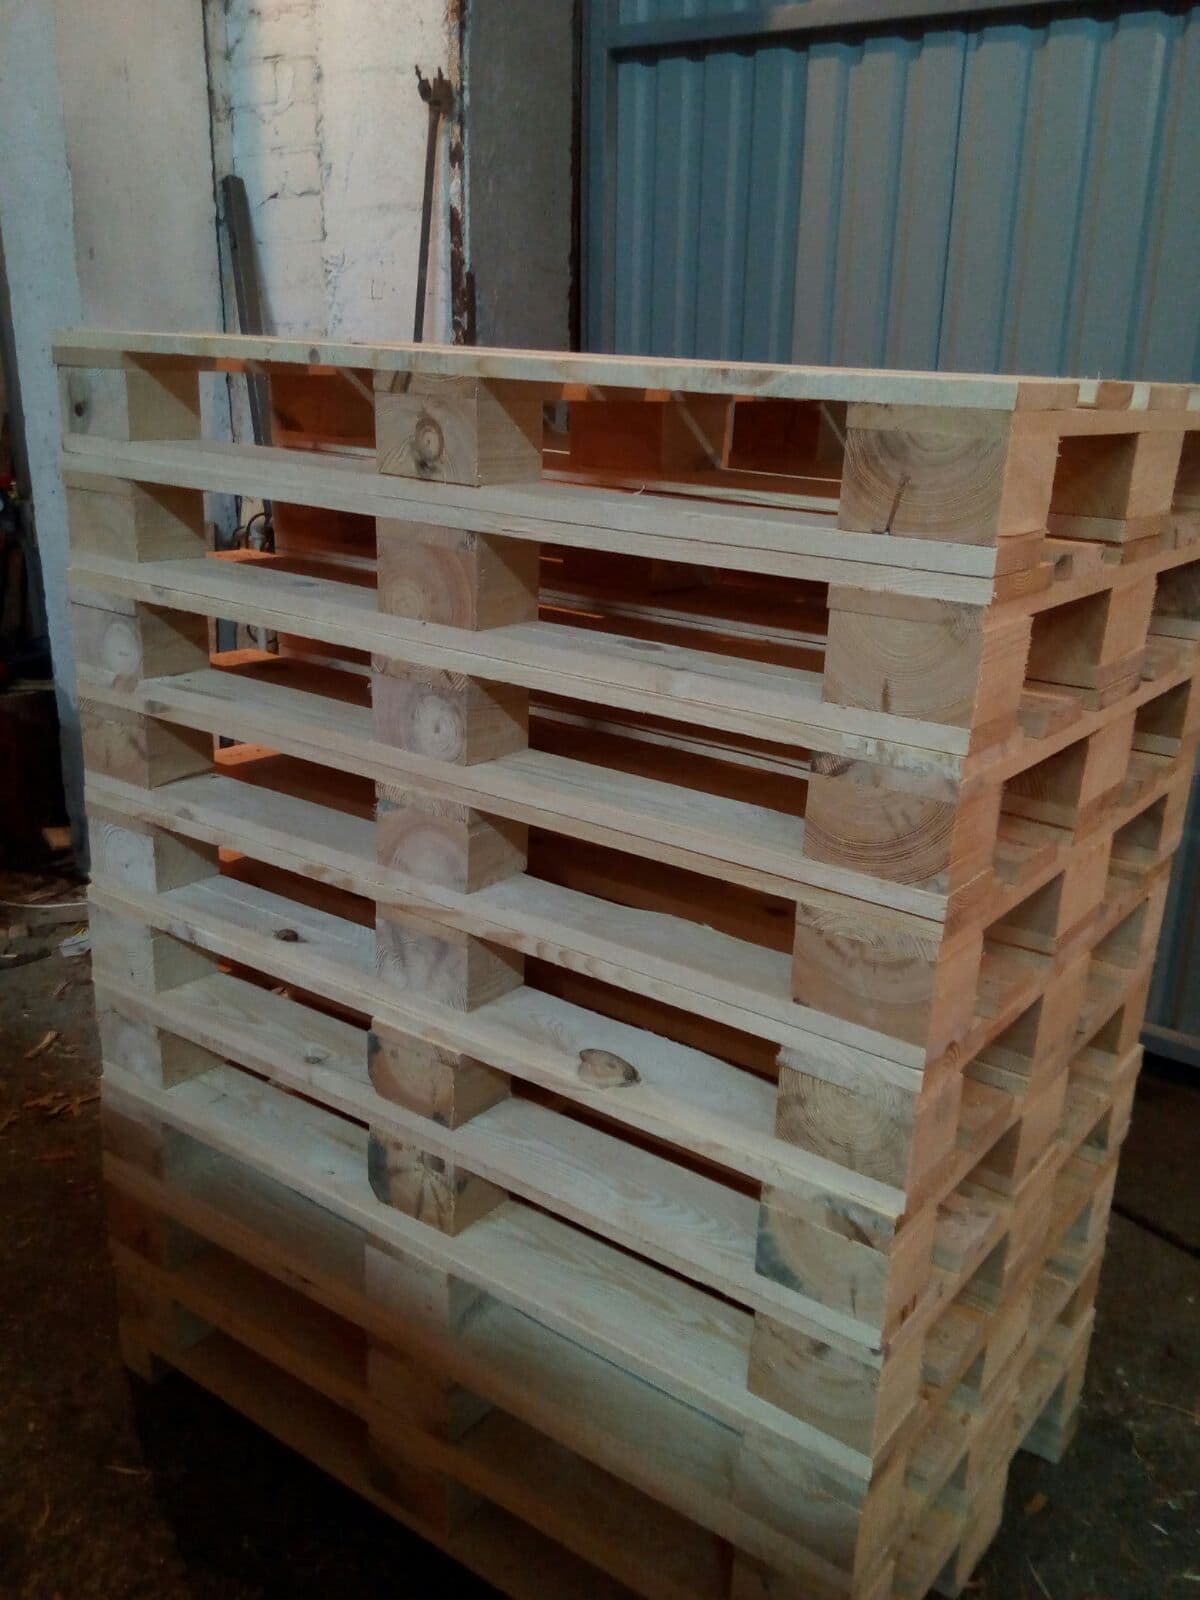 Wood boards_ lumber_ pallet components